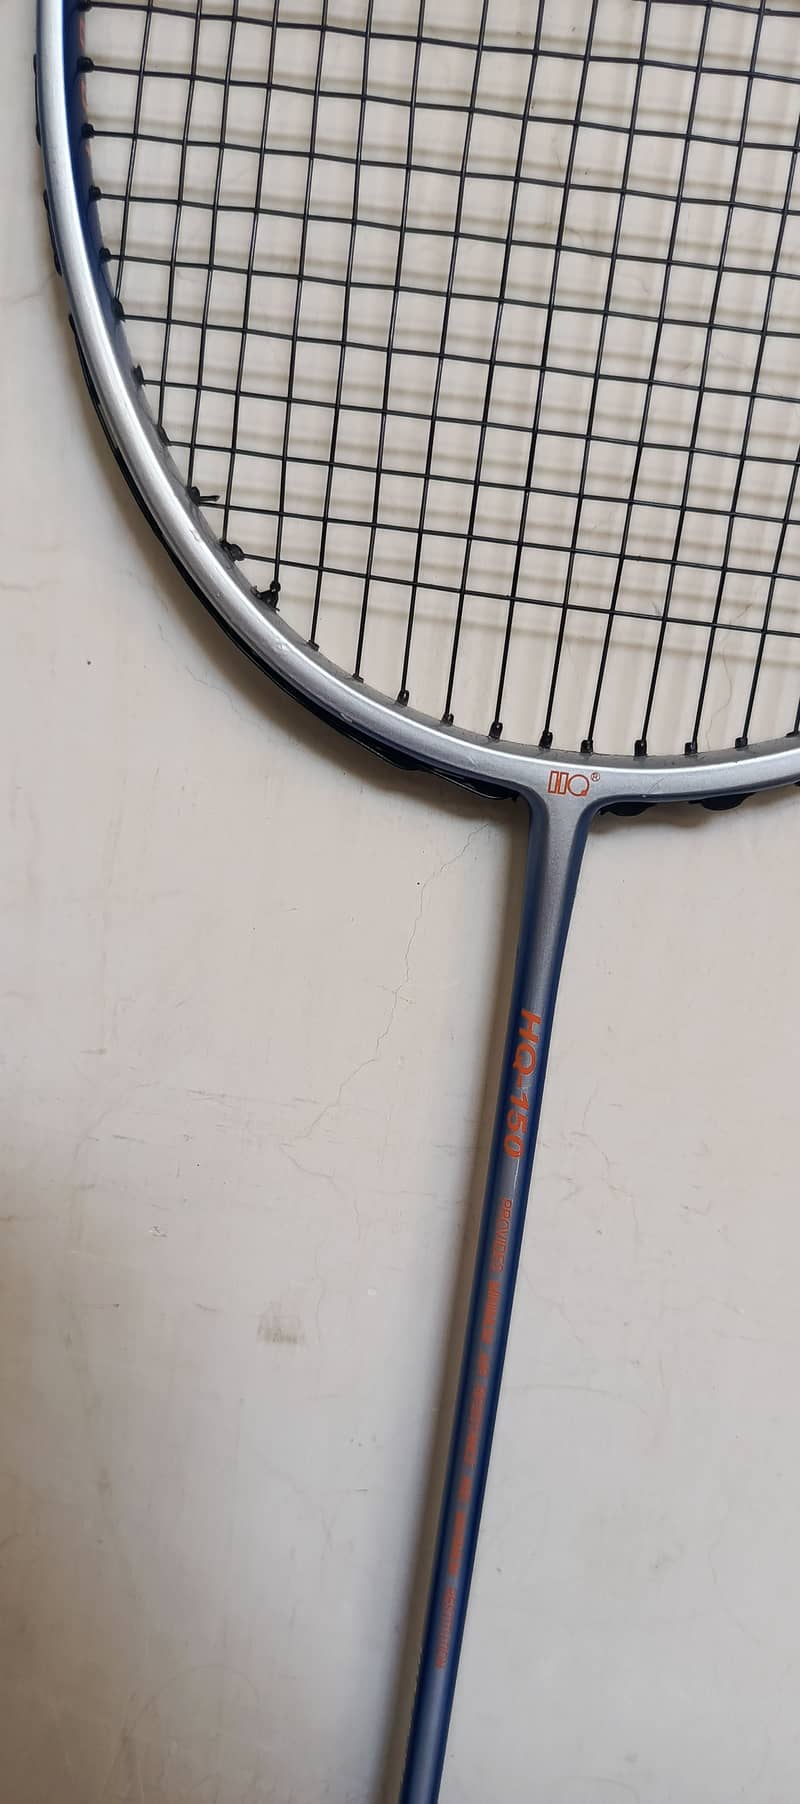 Badminton Racket | Hiqua 150 made in USA weight 84 tension 28 lbs 6